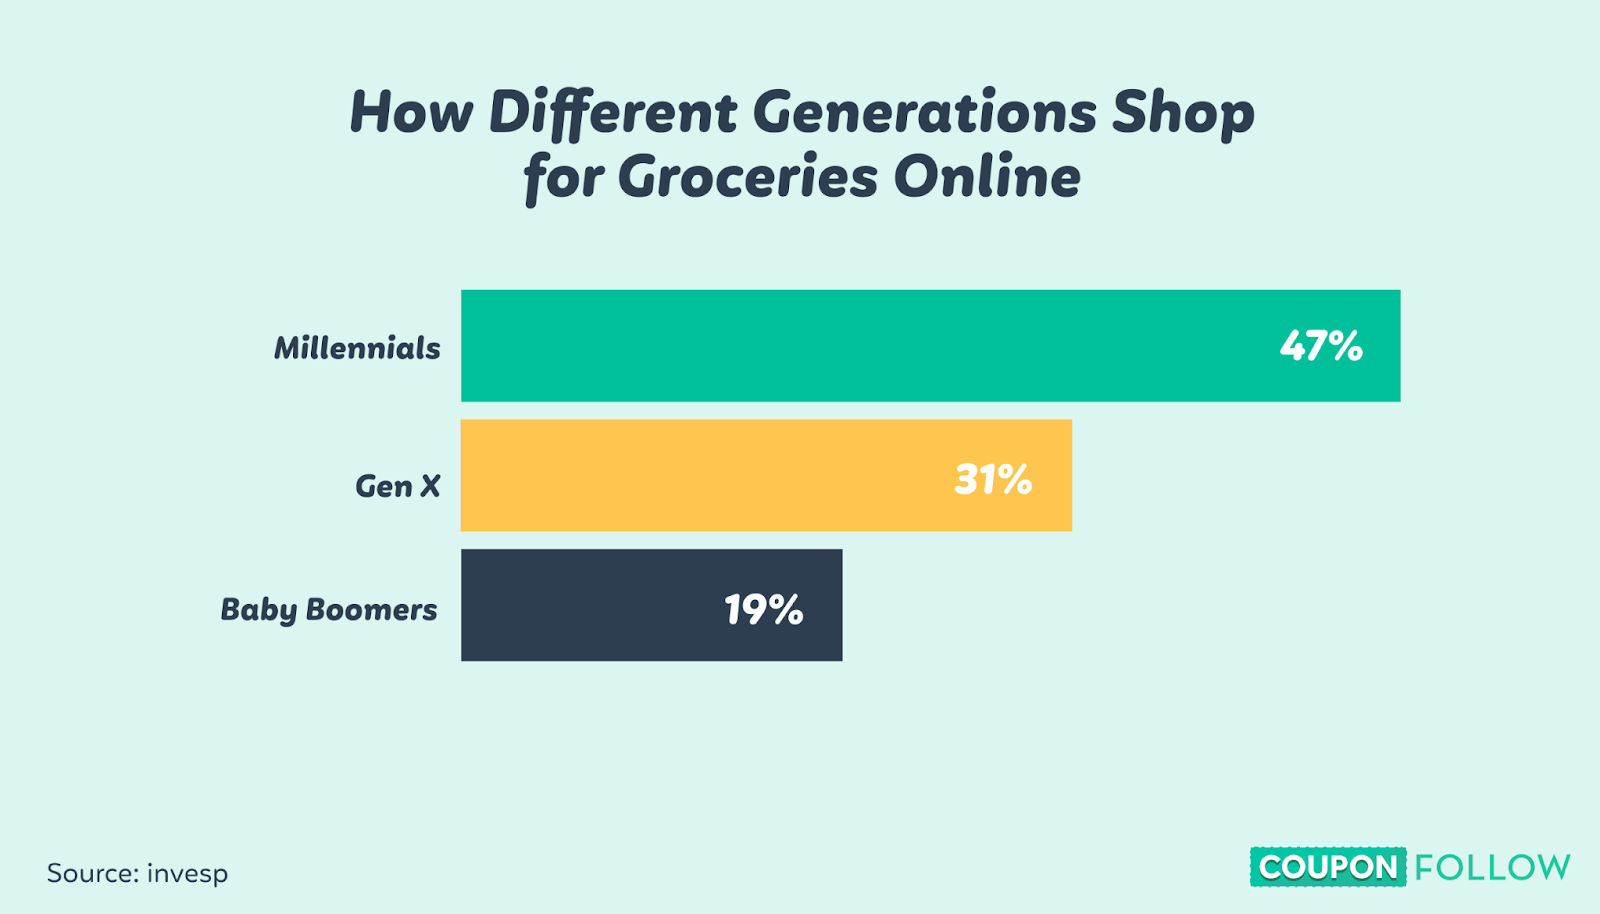 Graph showing the percentage of Millennials, GenX, and Baby Boomers who shop for groceries online